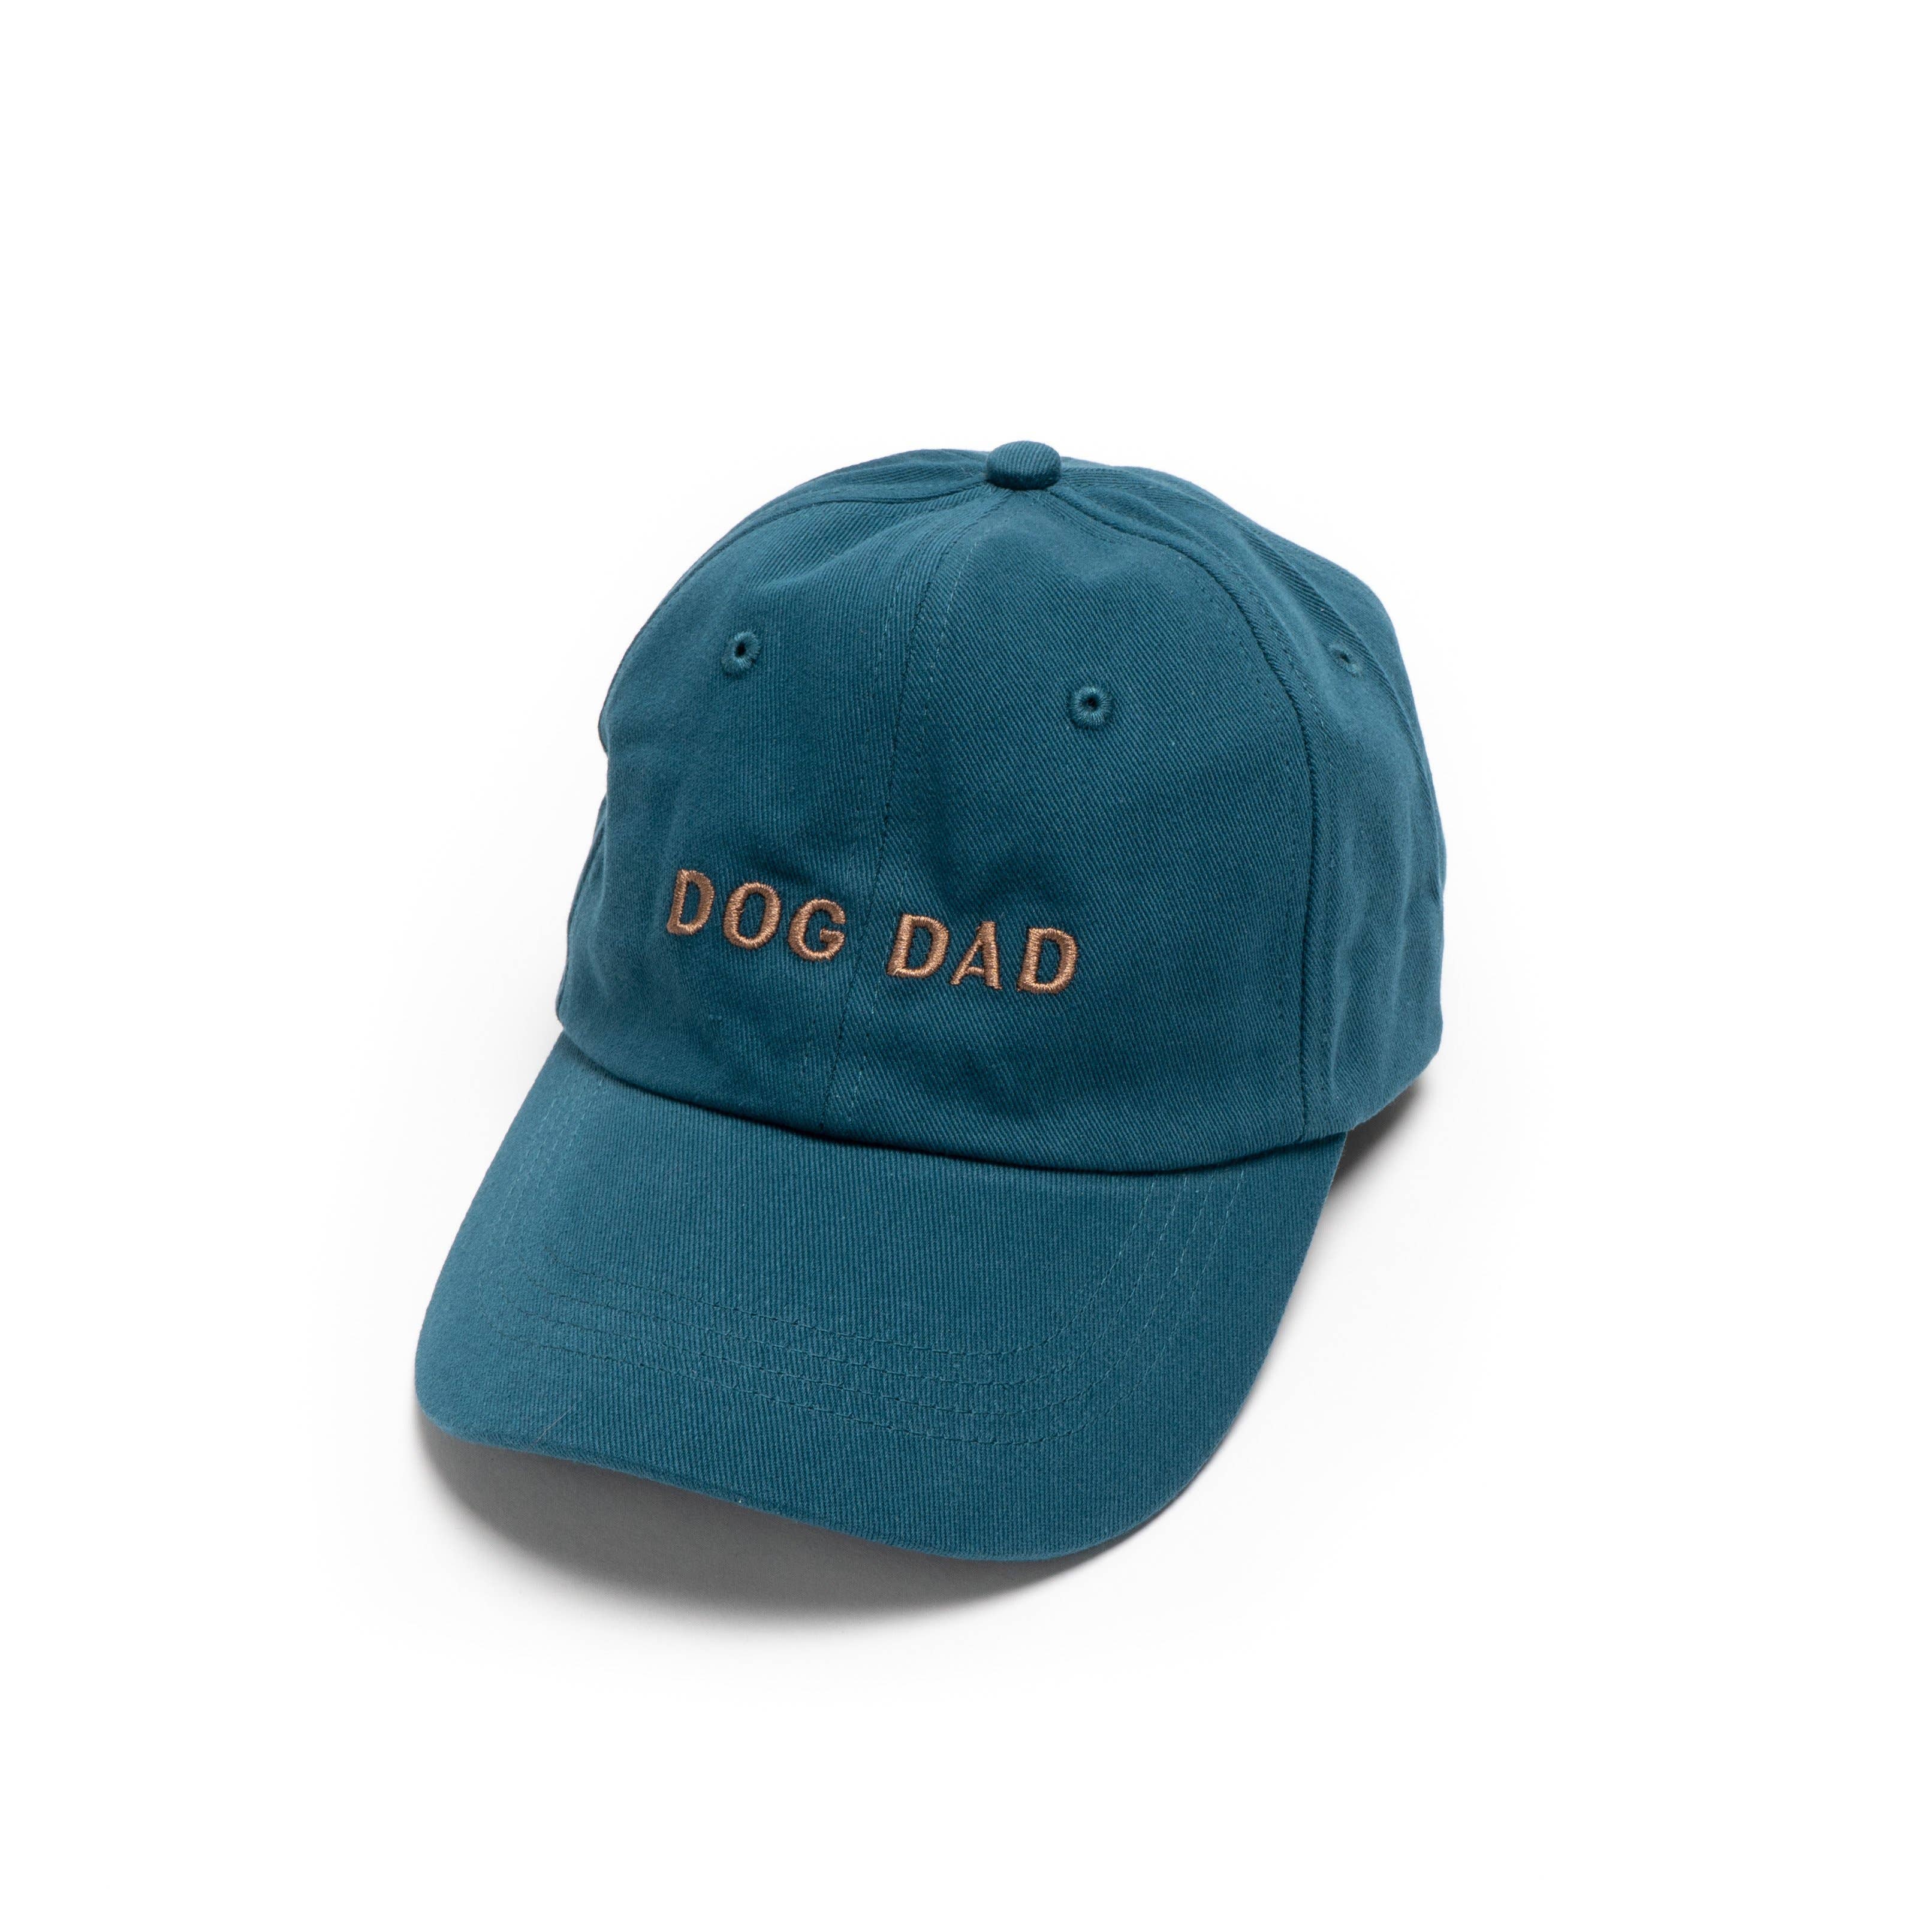 Lucy & Co. - Dog Dad Hat